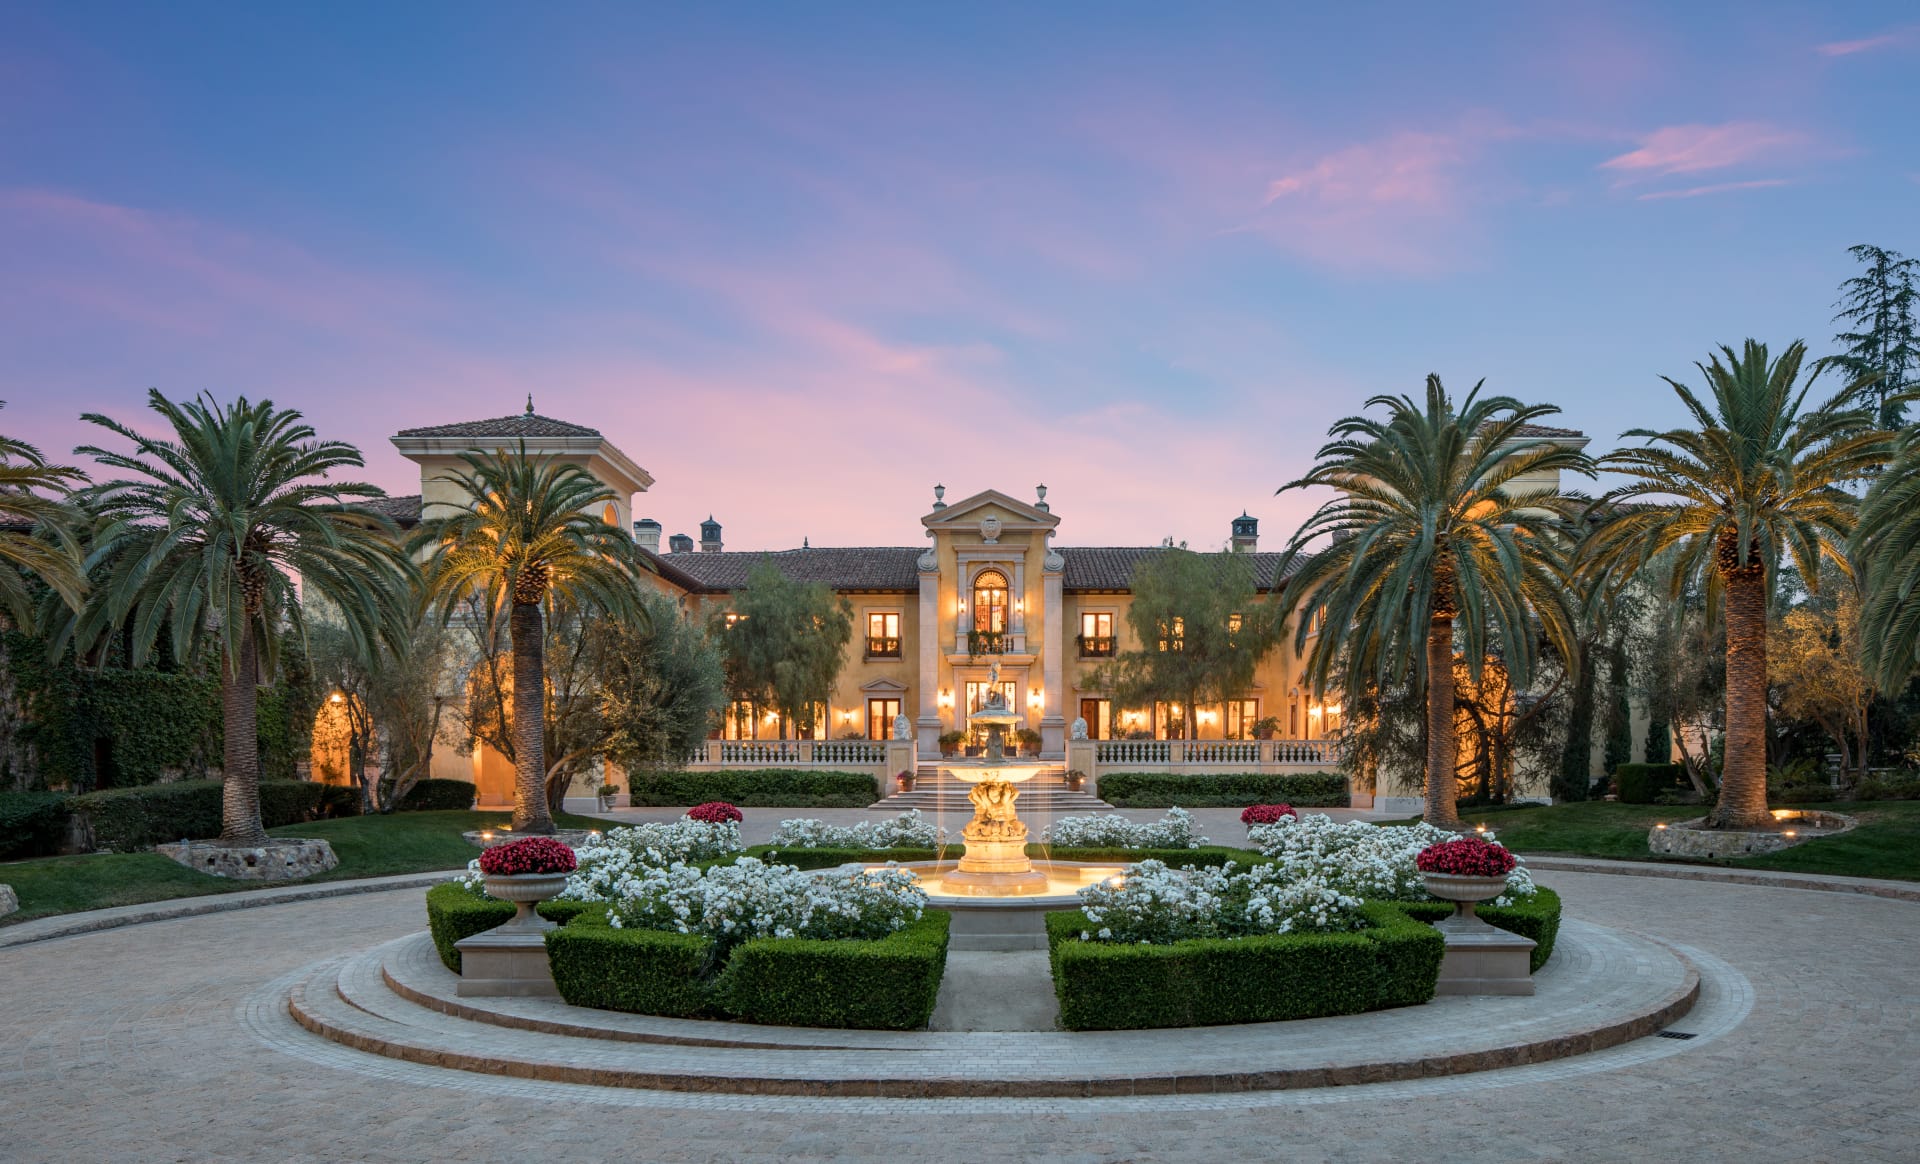 $100M-Plus Club: The 10 Most Expensive Homes in the U.S.